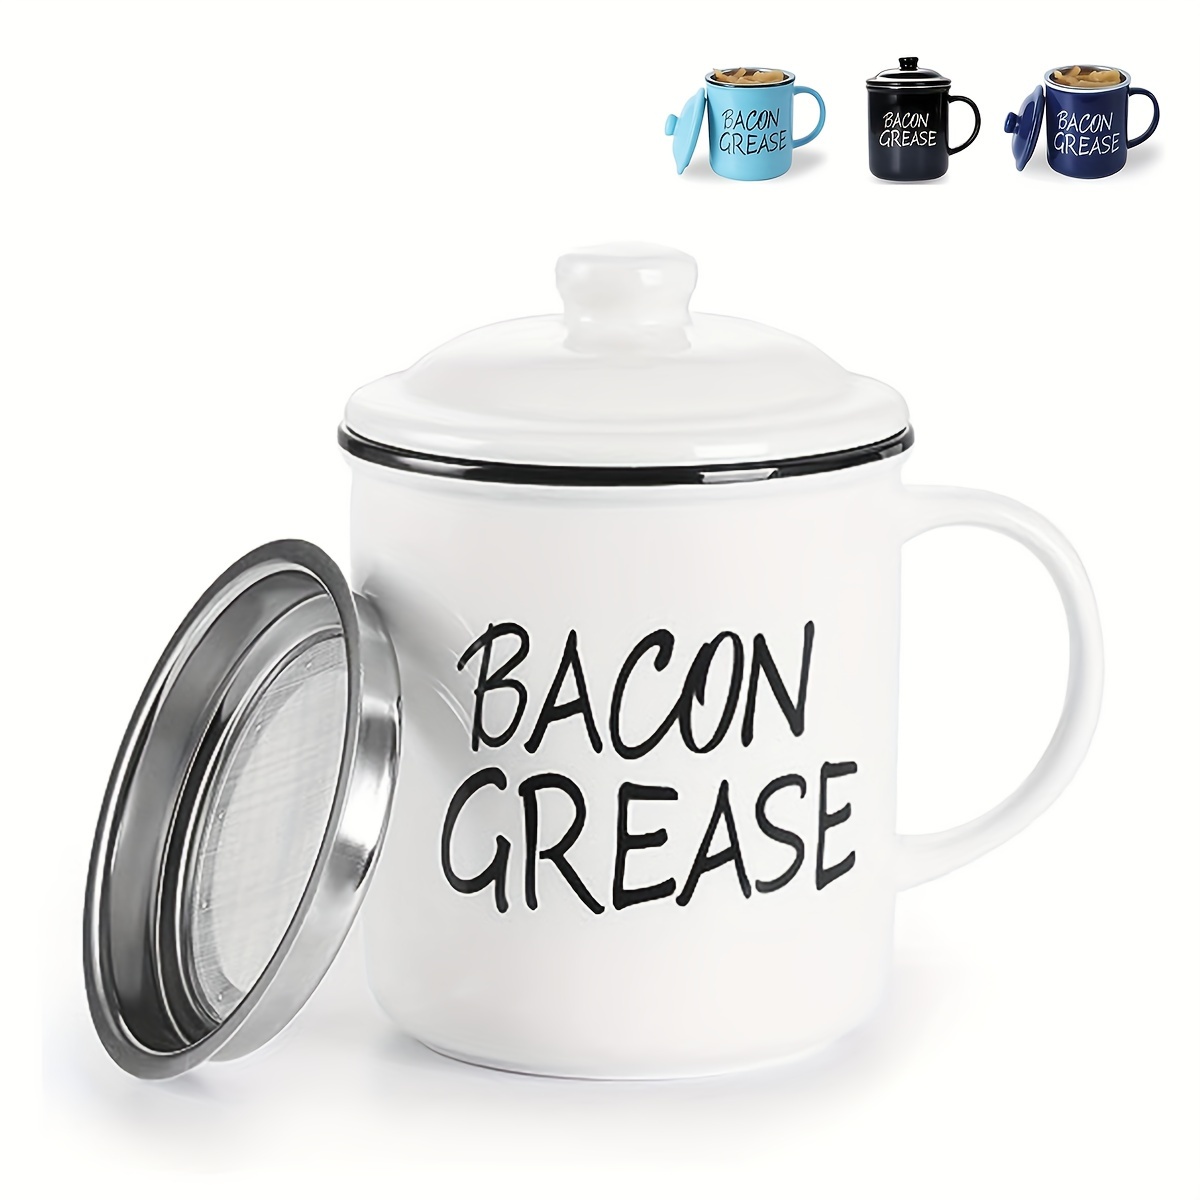 Bacon Grease Saver with Strainer,1.7L Kitchen Grease Container Fat